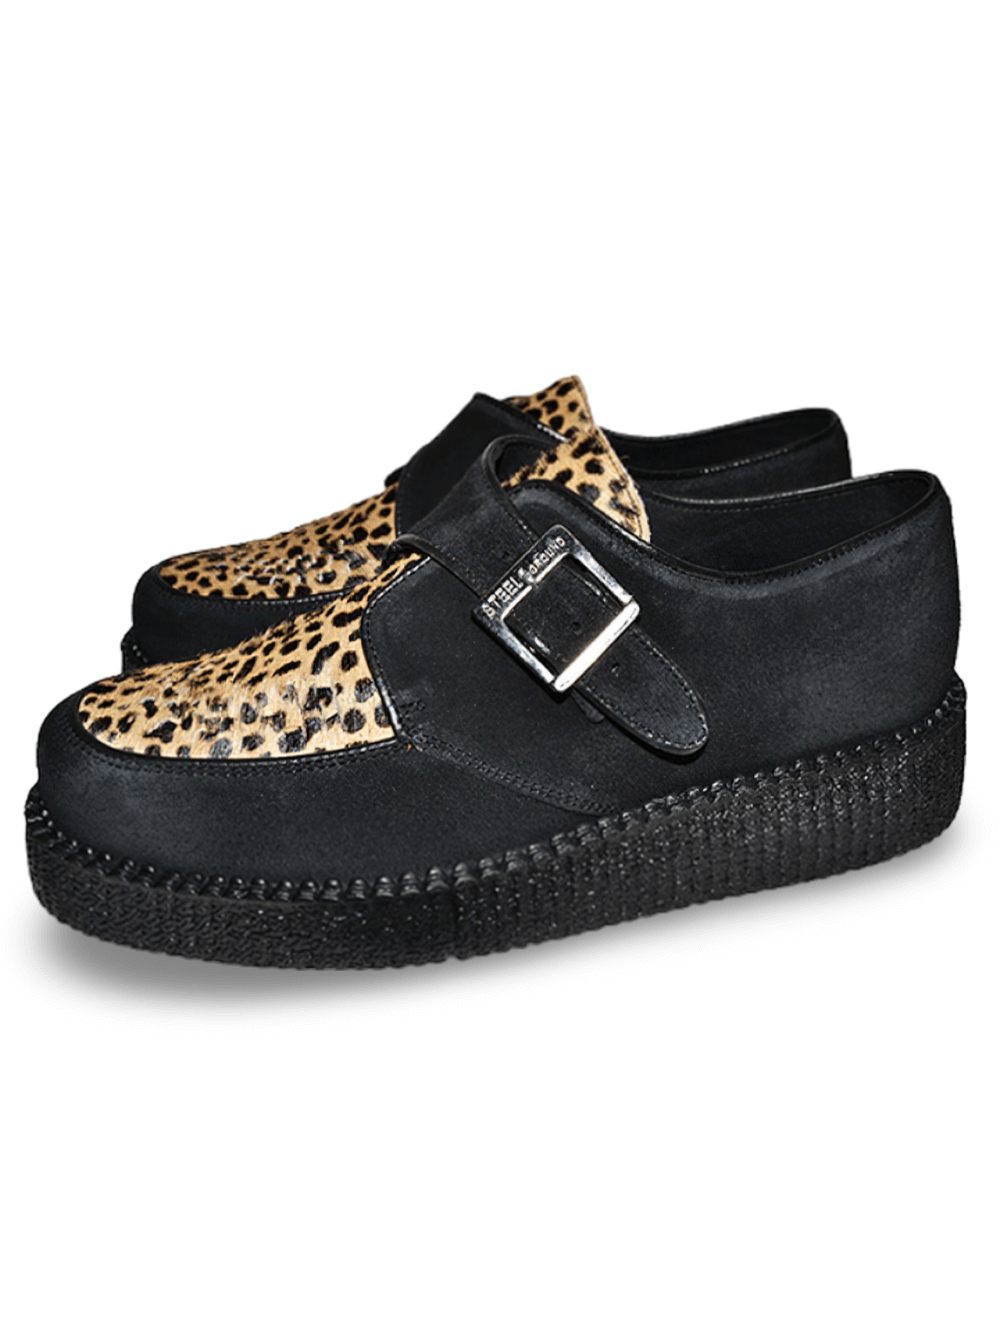 Black and Leopard Creepers with Rubber Sole and Buckle